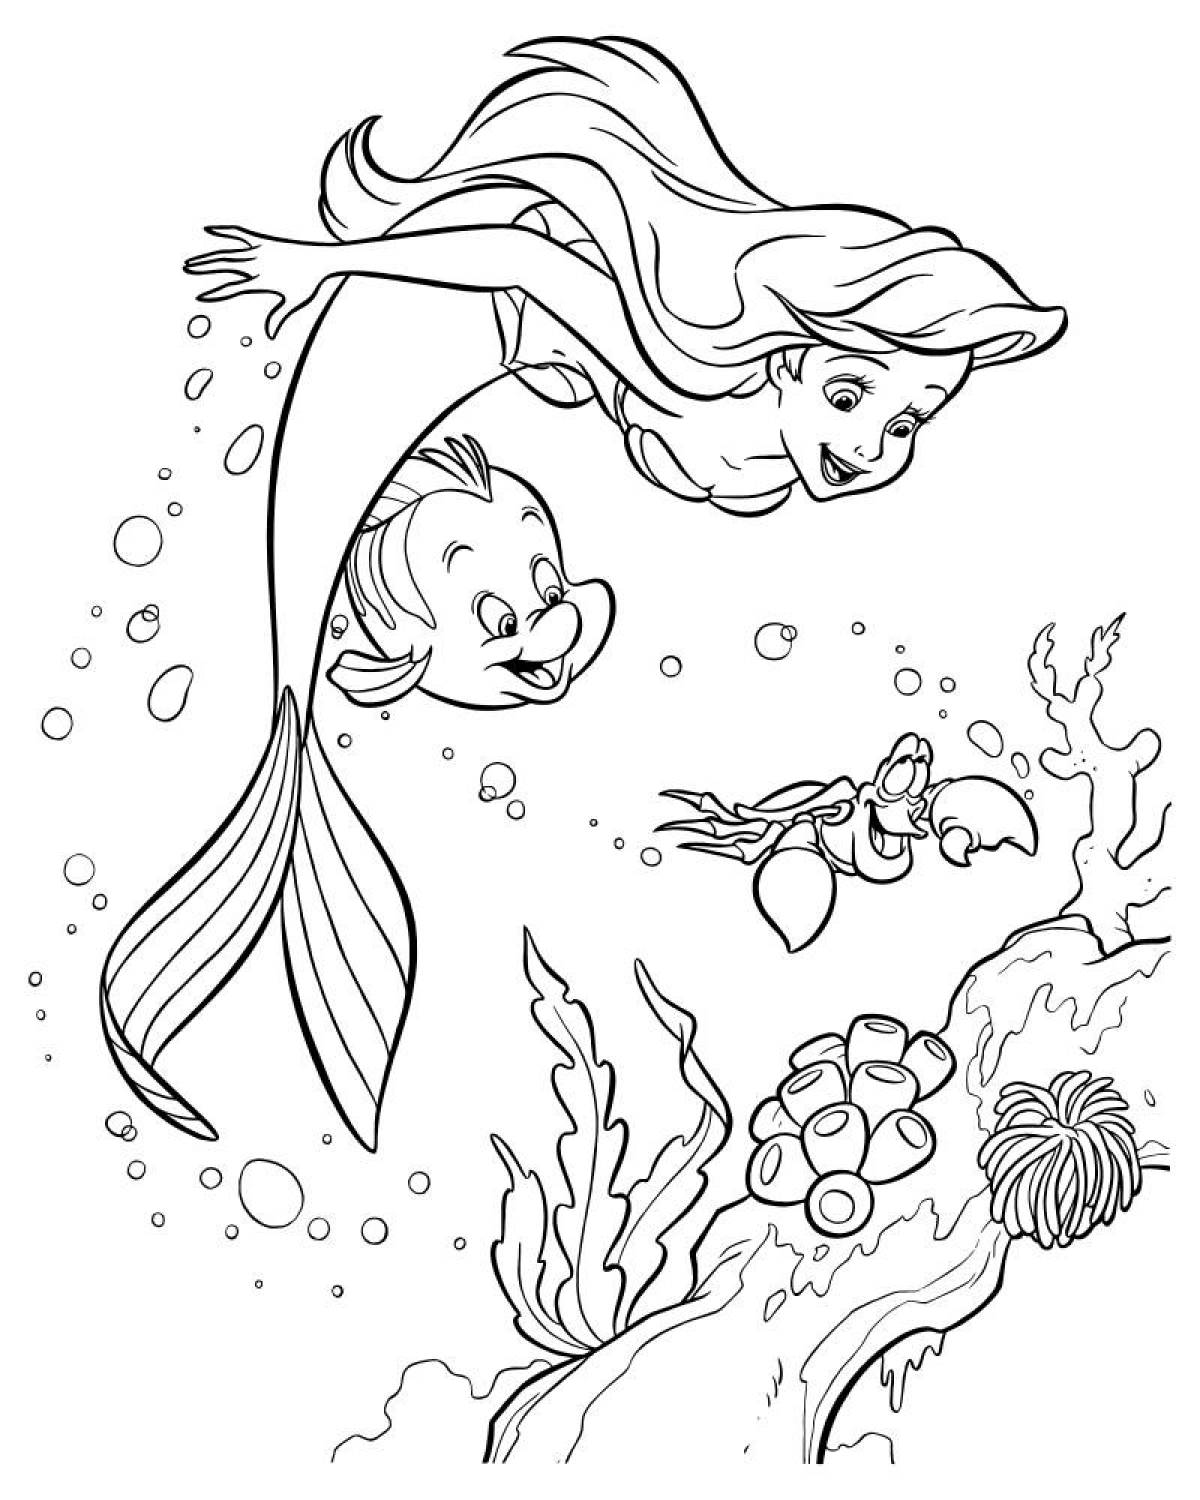 Exotic mermaid coloring page